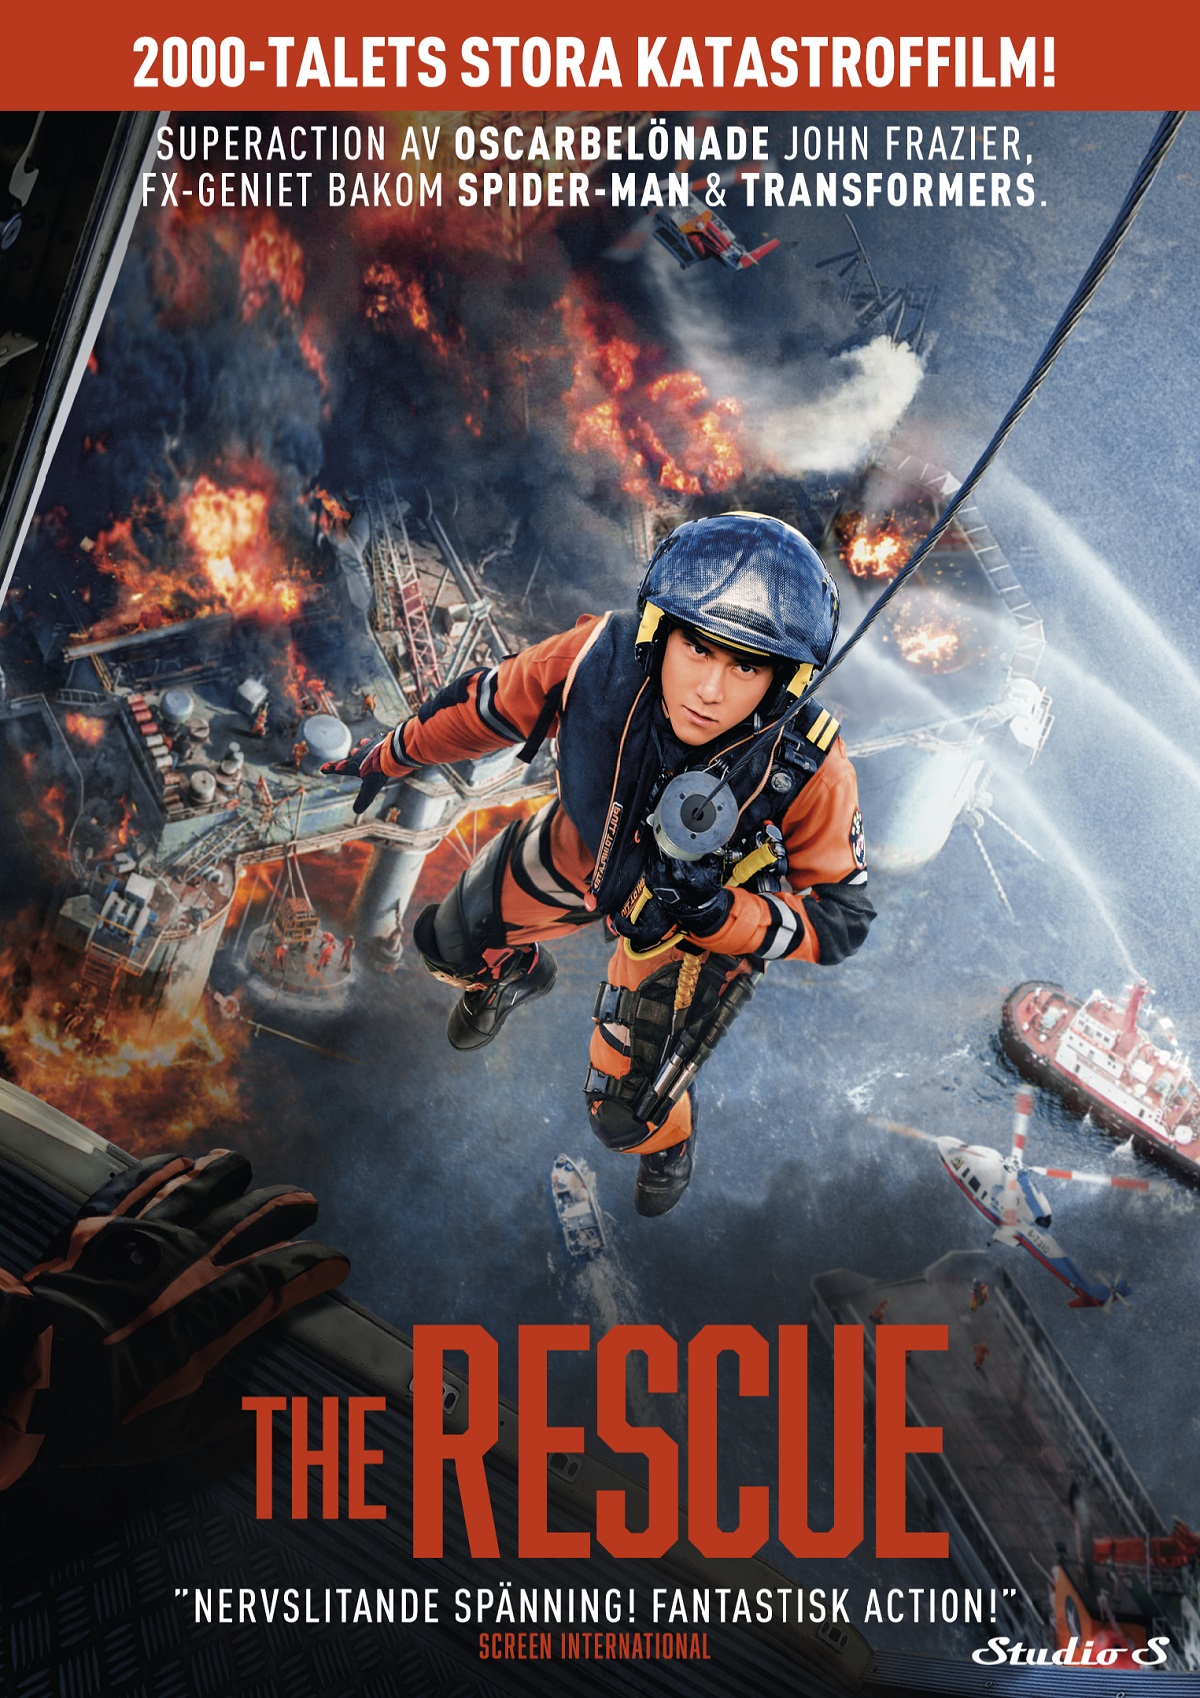 NF 1106 The Rescue (DVD)